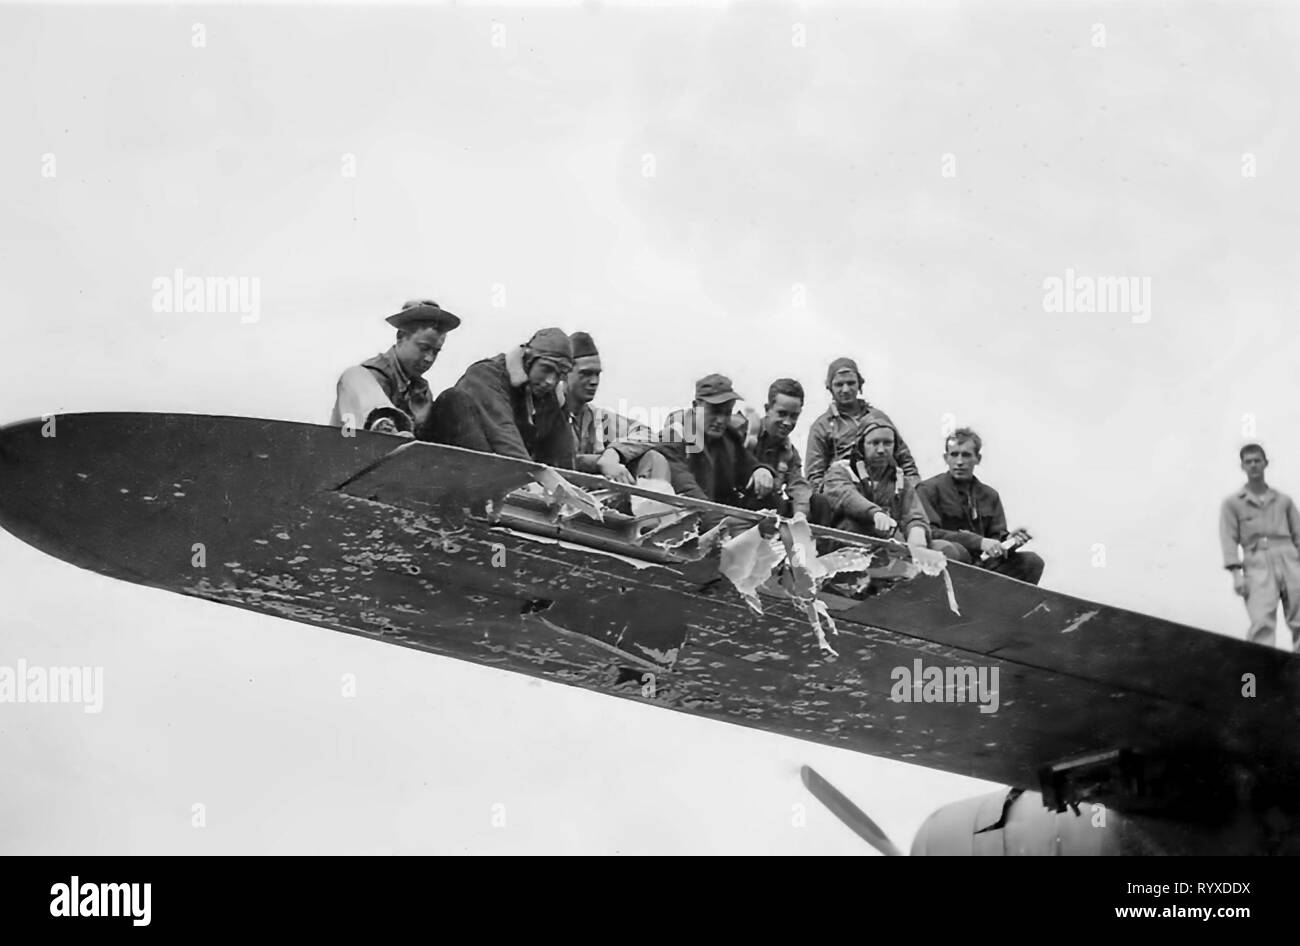 Personal photographs and memorabilia of fighting Americans during the Second World War. Aircraft damage and debris. Stock Photo